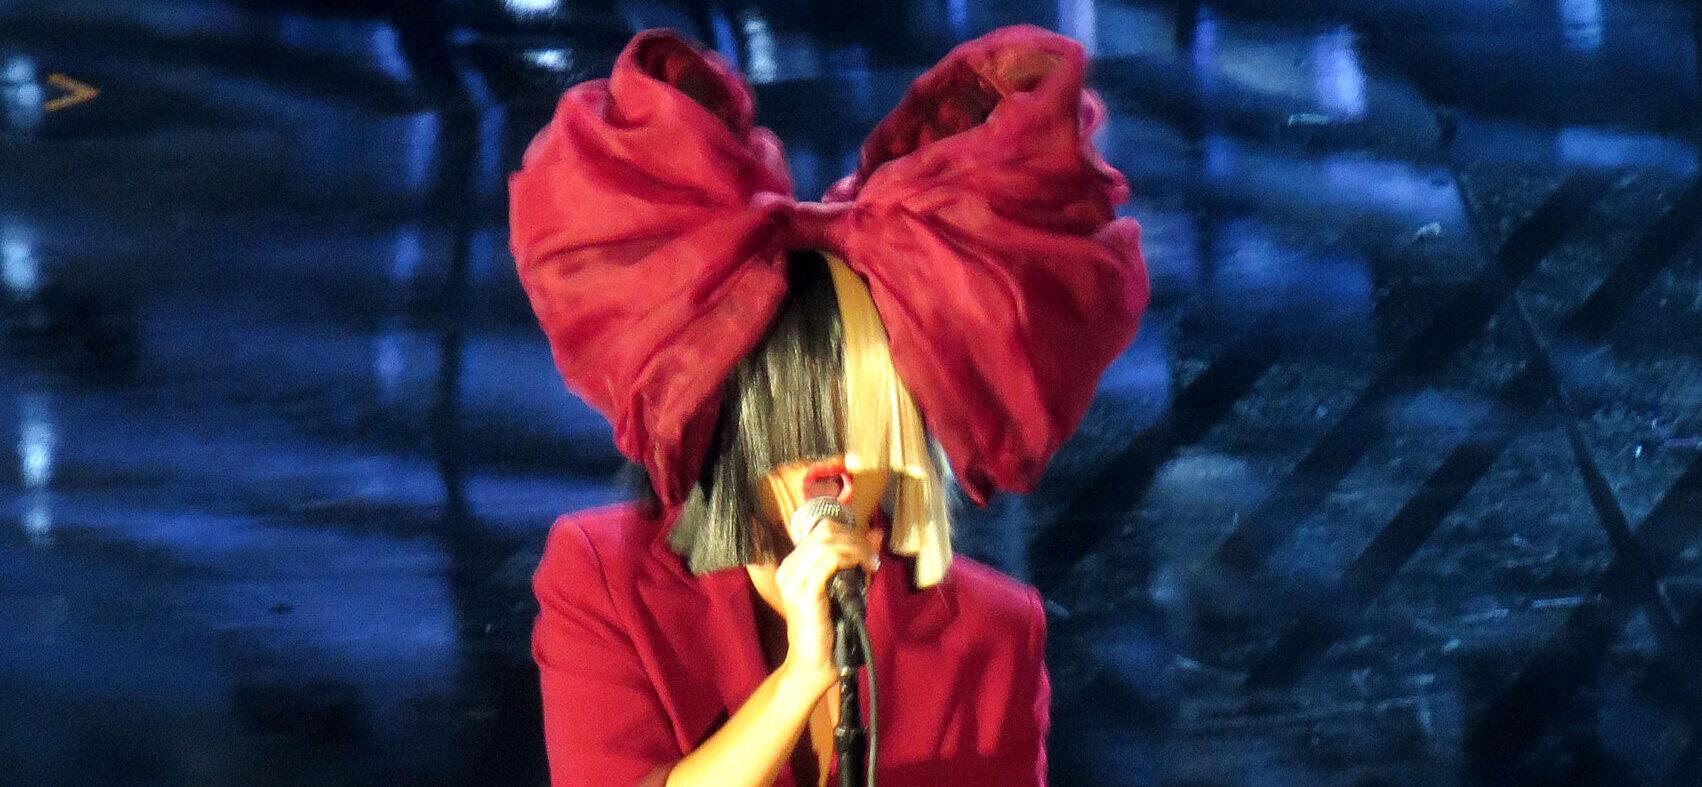 Sia looks like a christmas present as she performs at apos Shining a Light apos concert in LA